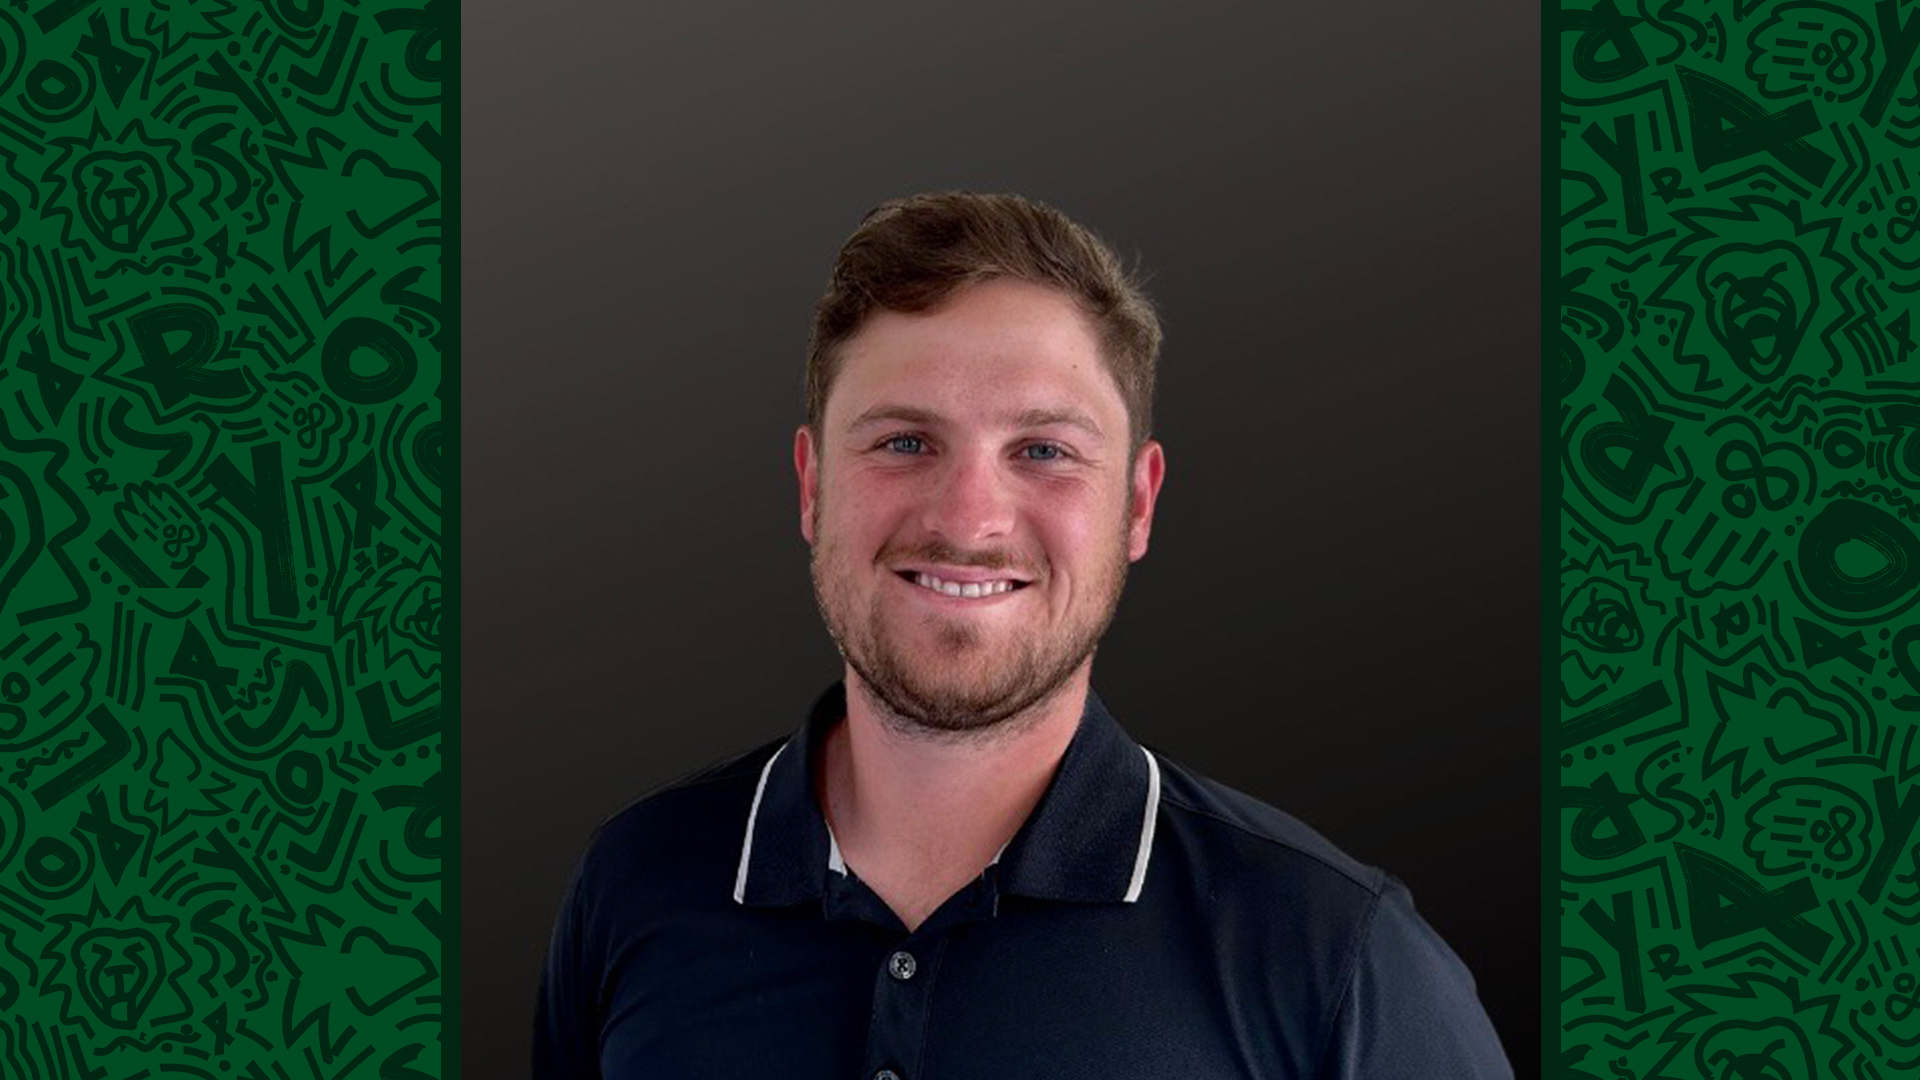 Head shot of Coach Braden Persian on green background with graffiti text